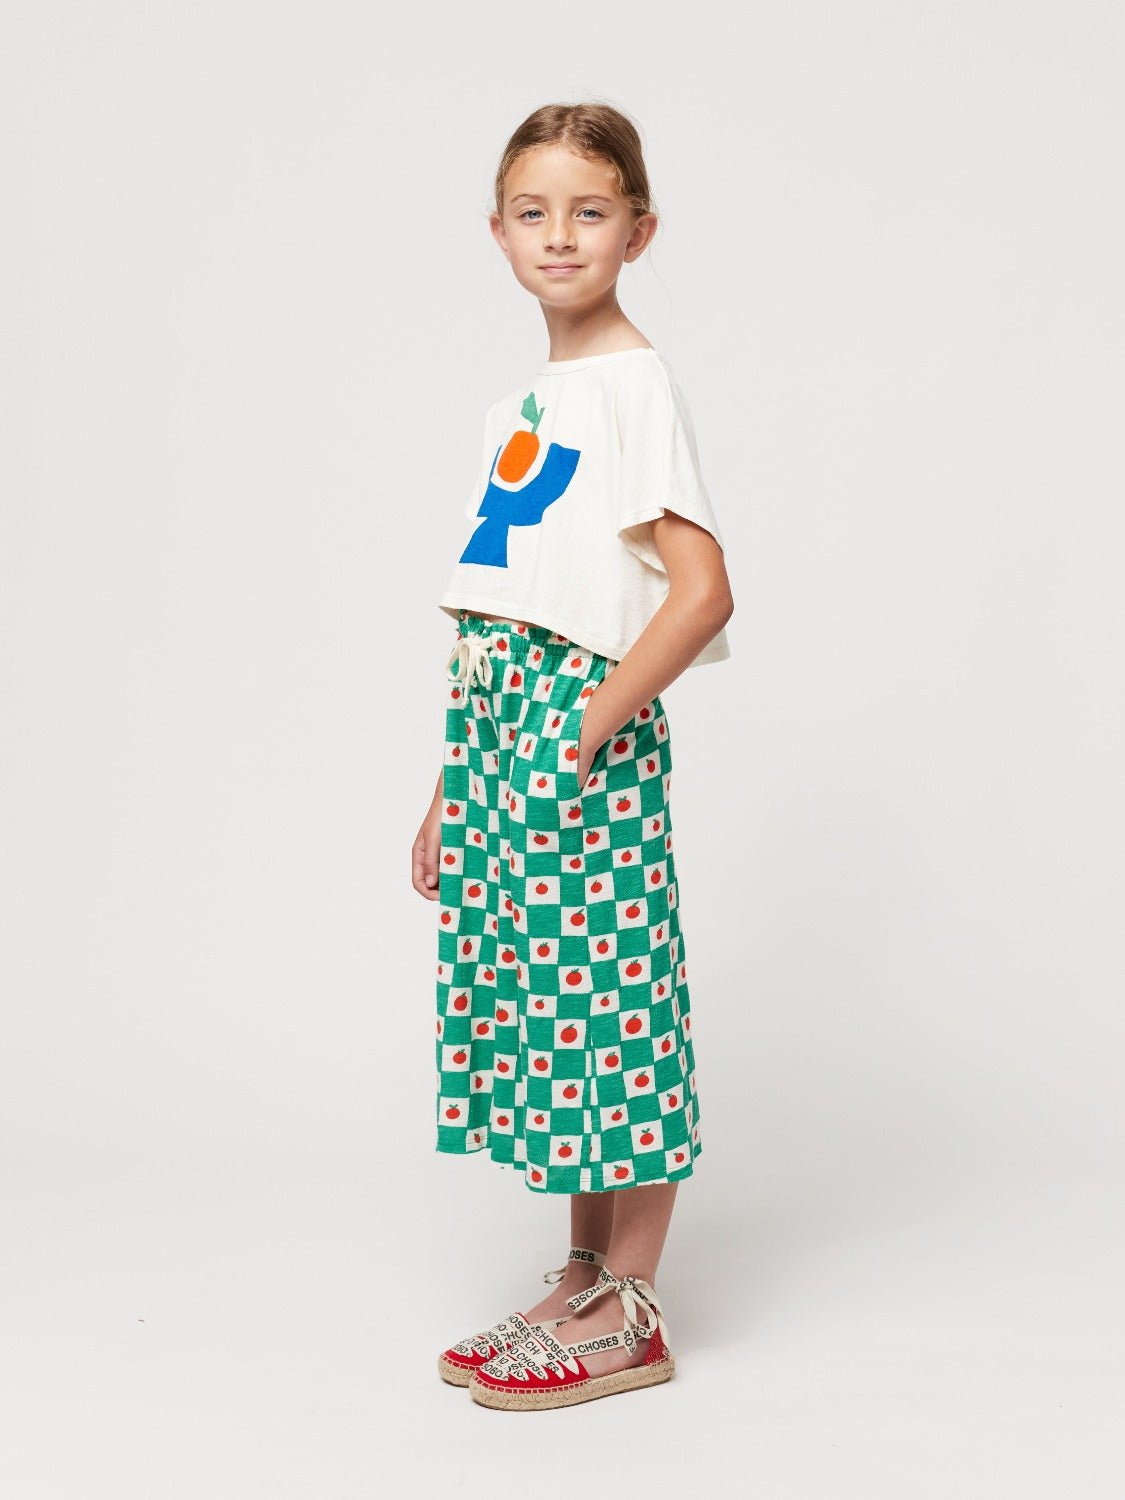 Tomato All Over Culotte Pants by Bobo Choses - Petite Belle